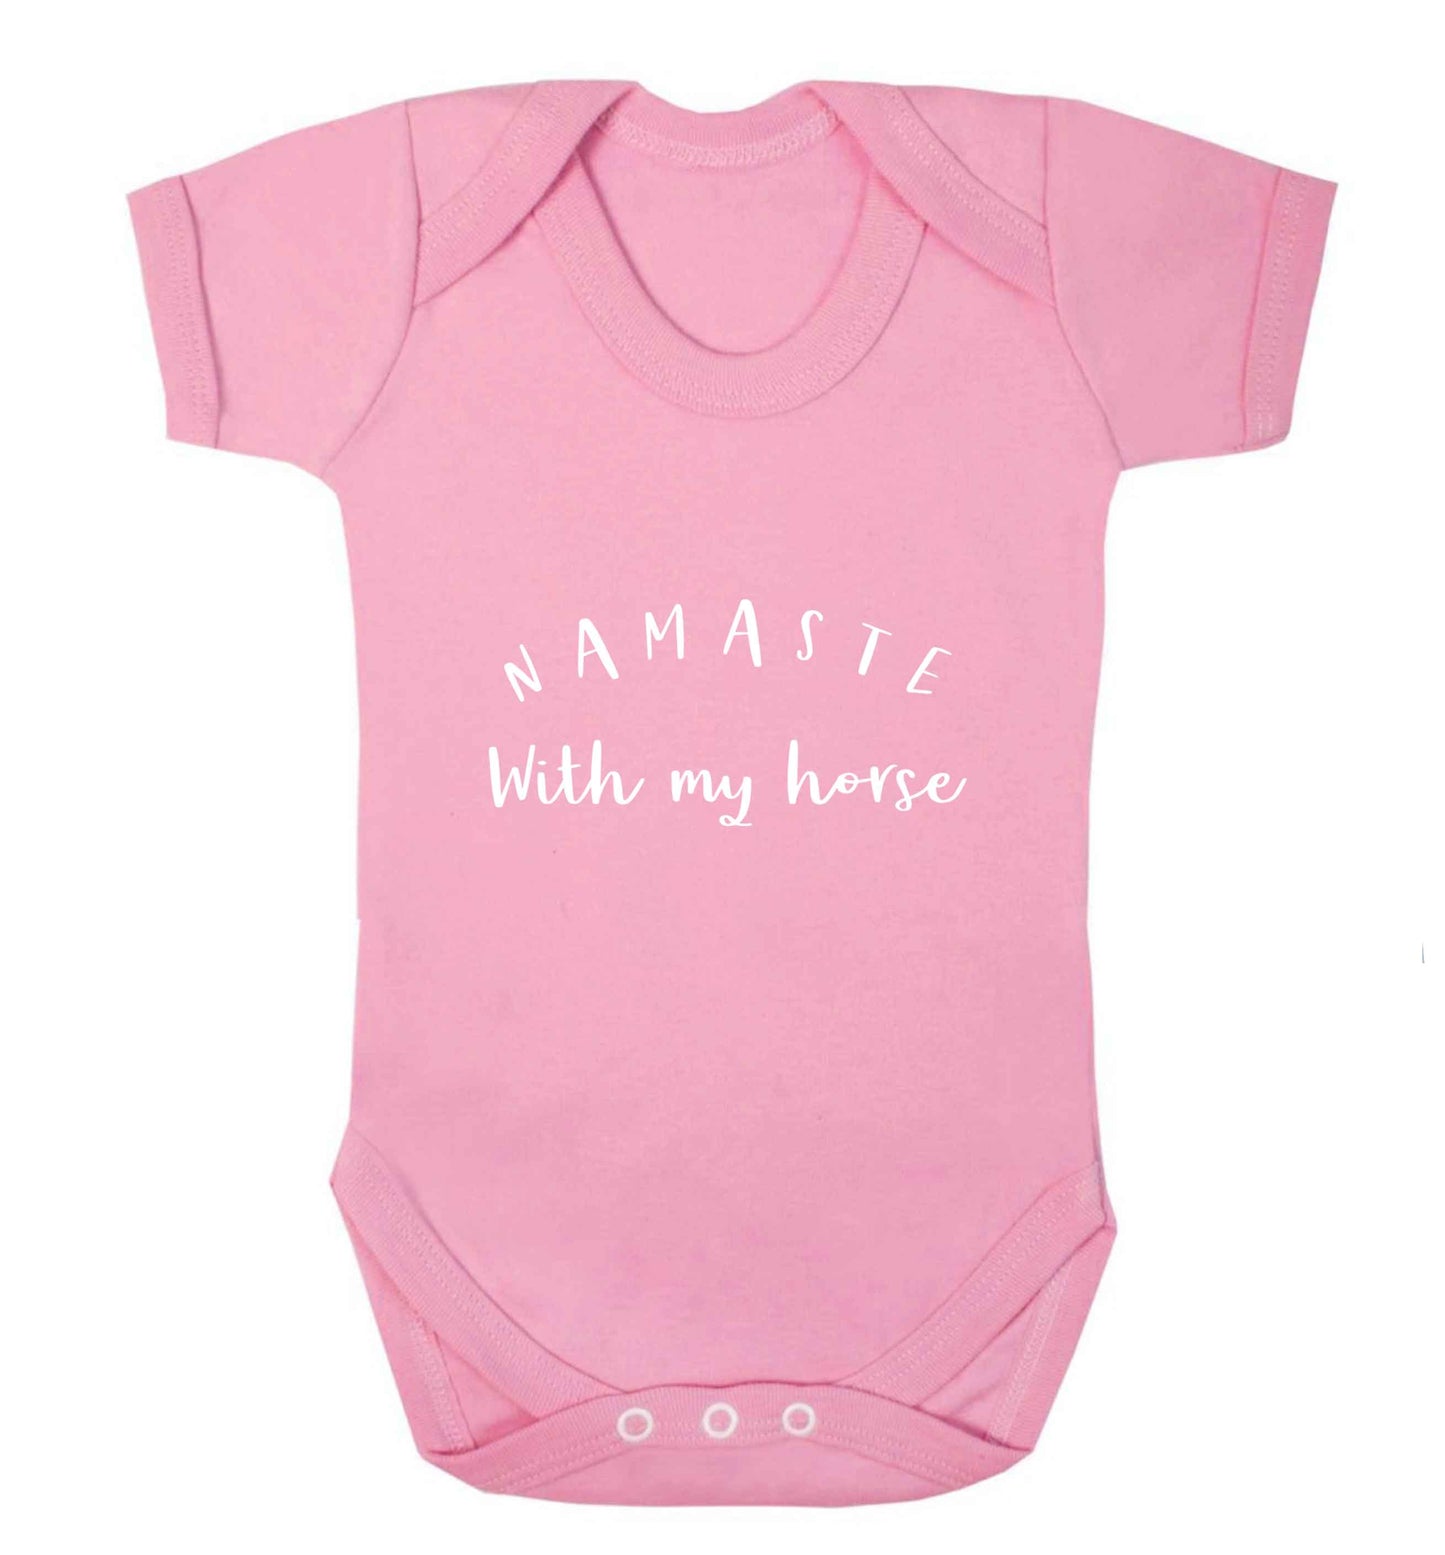 Namaste with my horse baby vest pale pink 18-24 months